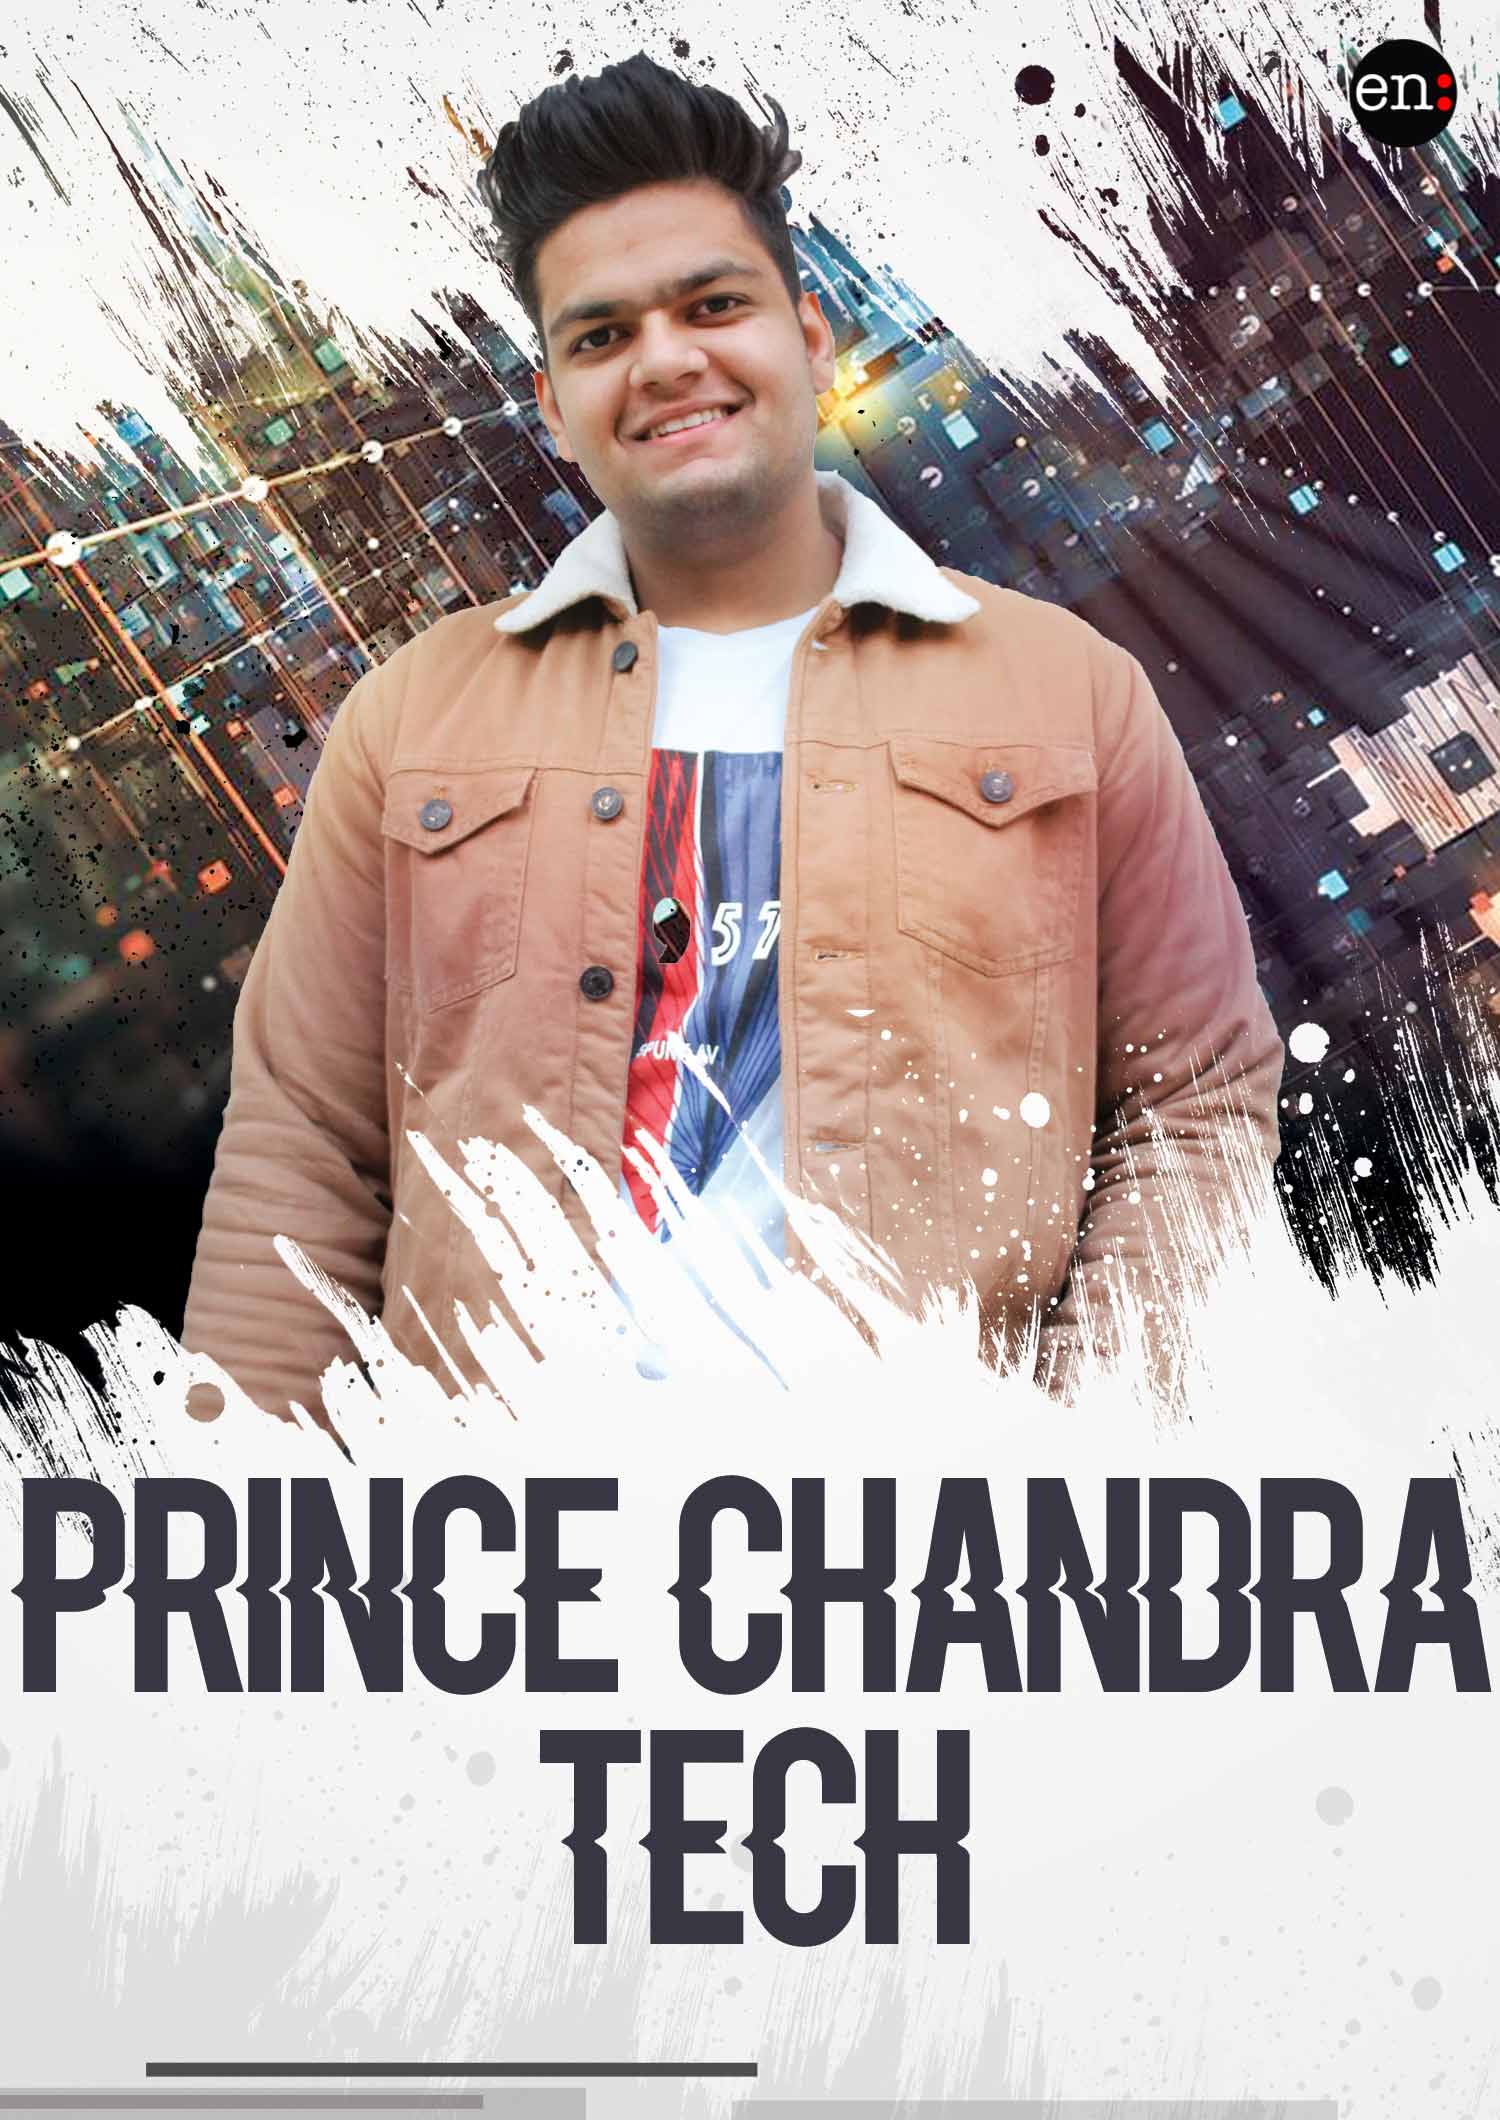 Prince Chandra - Contact Number, Phone Number, Mobile Number, Whatsapp Number, Email Address and Website